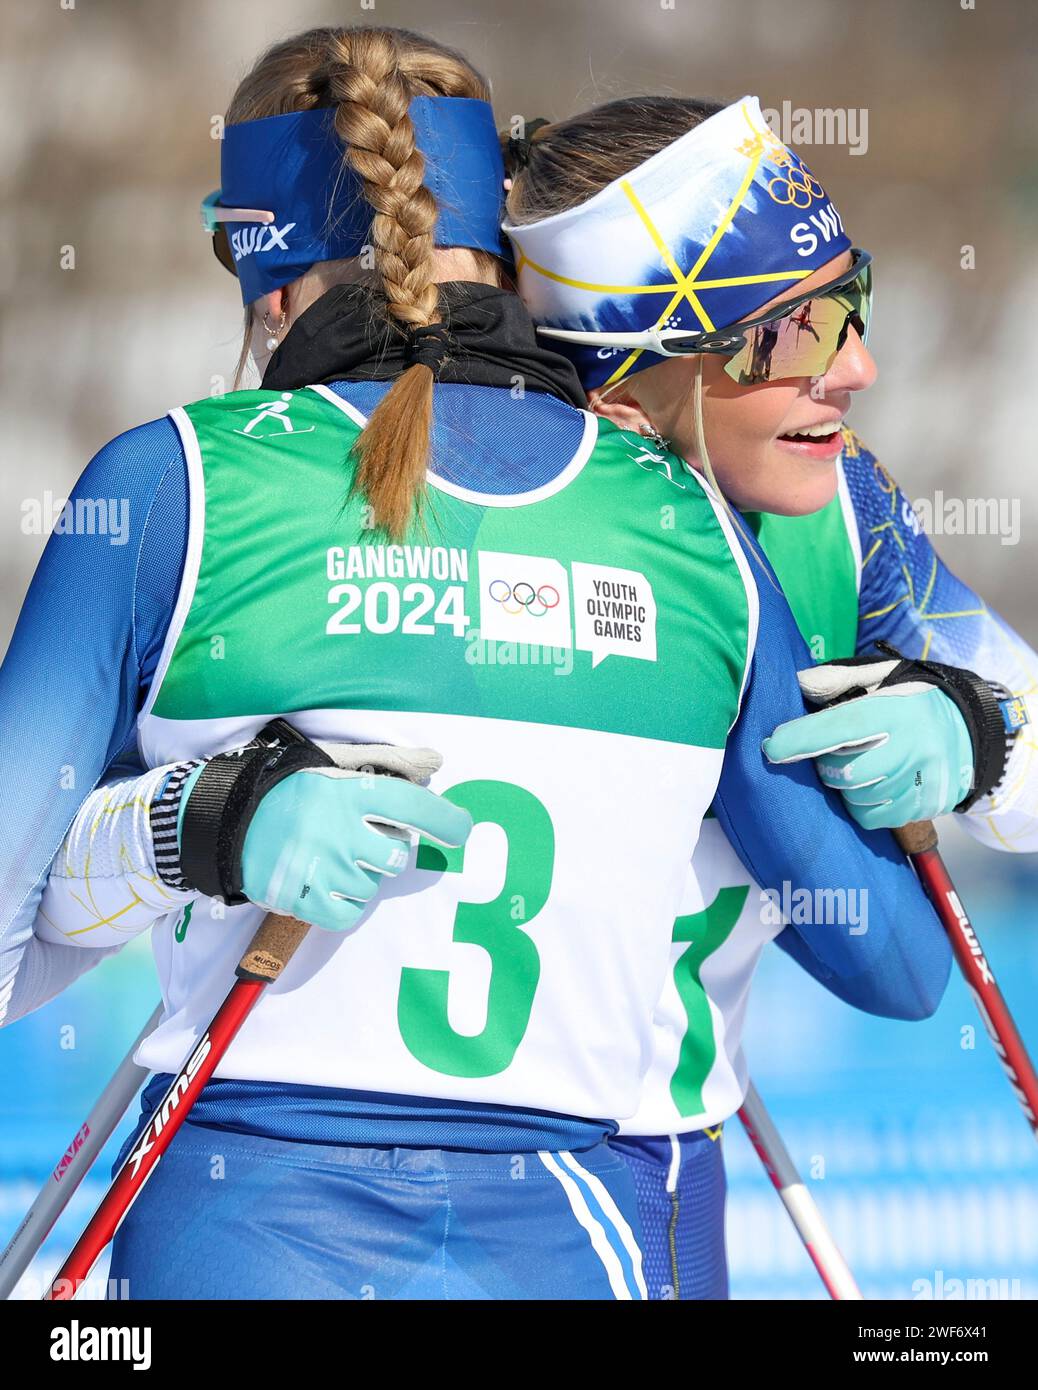 Pyeongchang, South Korea. 29th Jan, 2024. Elsa Taenglander (R) of Sweden hugs Nelli-Lotta Karppelin of Finland after the final of the Women's Sprint Free of Cross-Country Skiing event at the Gangwon 2024 Winter Youth Olympic Games in Pyeongchang, South Korea, Jan. 29, 2024. Credit: Hu Huhu/Xinhua/Alamy Live News Stock Photo